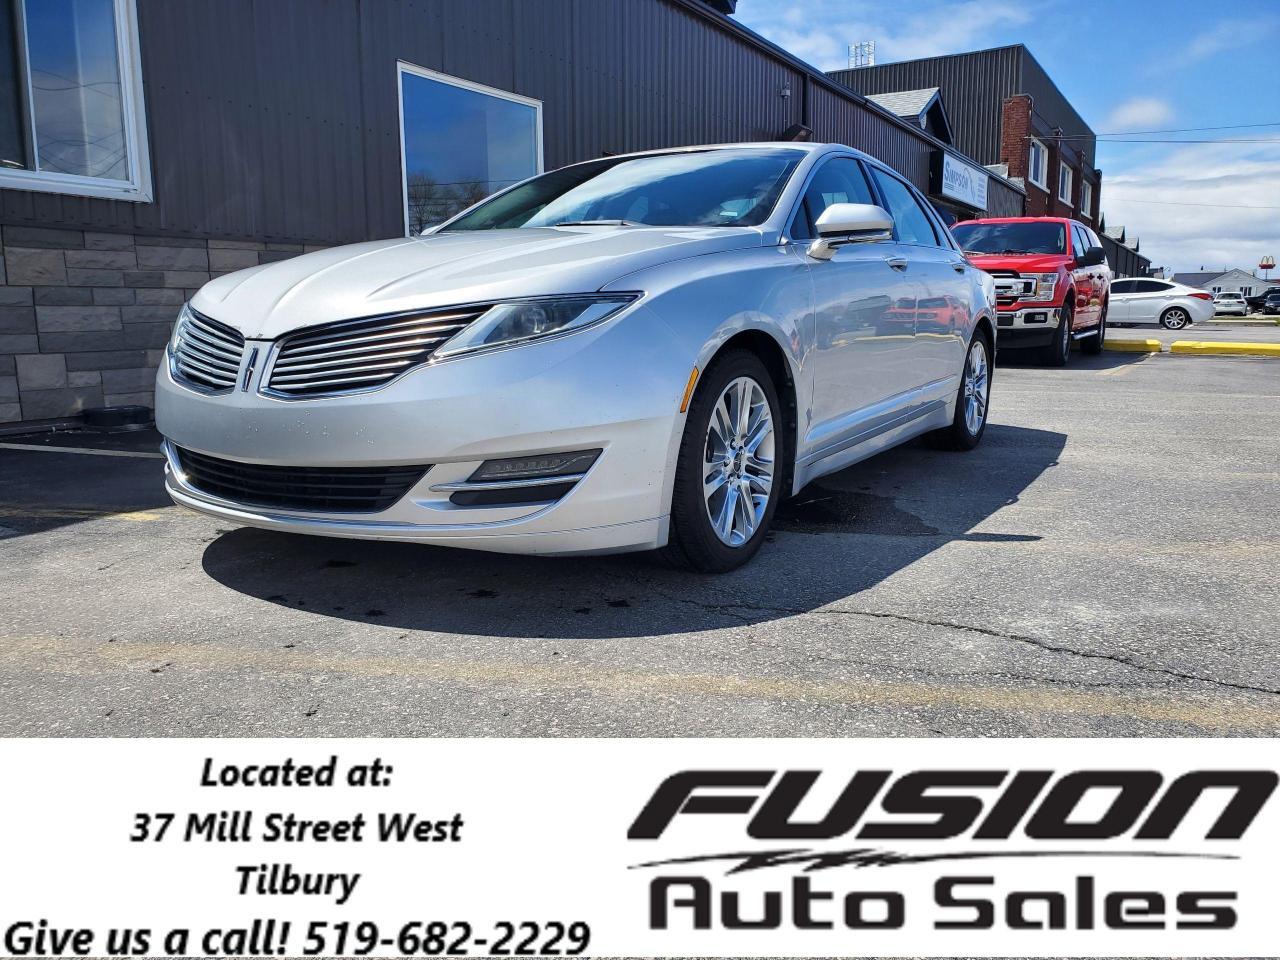 2013 Lincoln MKZ EcoBoost-NO HST TO A MAX OF $2000 LTD TIME ONLY